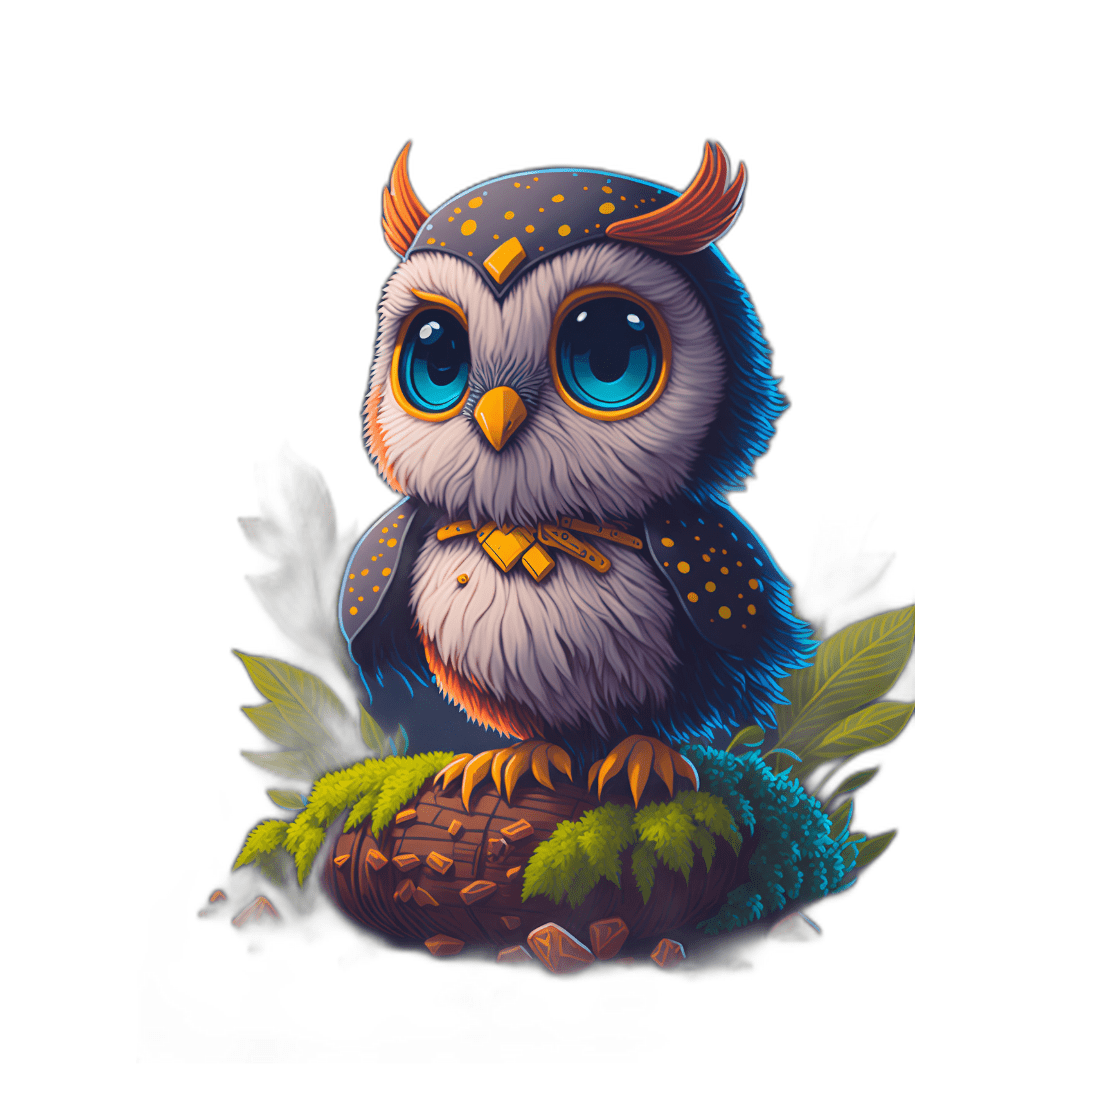 Cute owl 4k quality design for T-Shirts , logos , illustrations etc cover image.